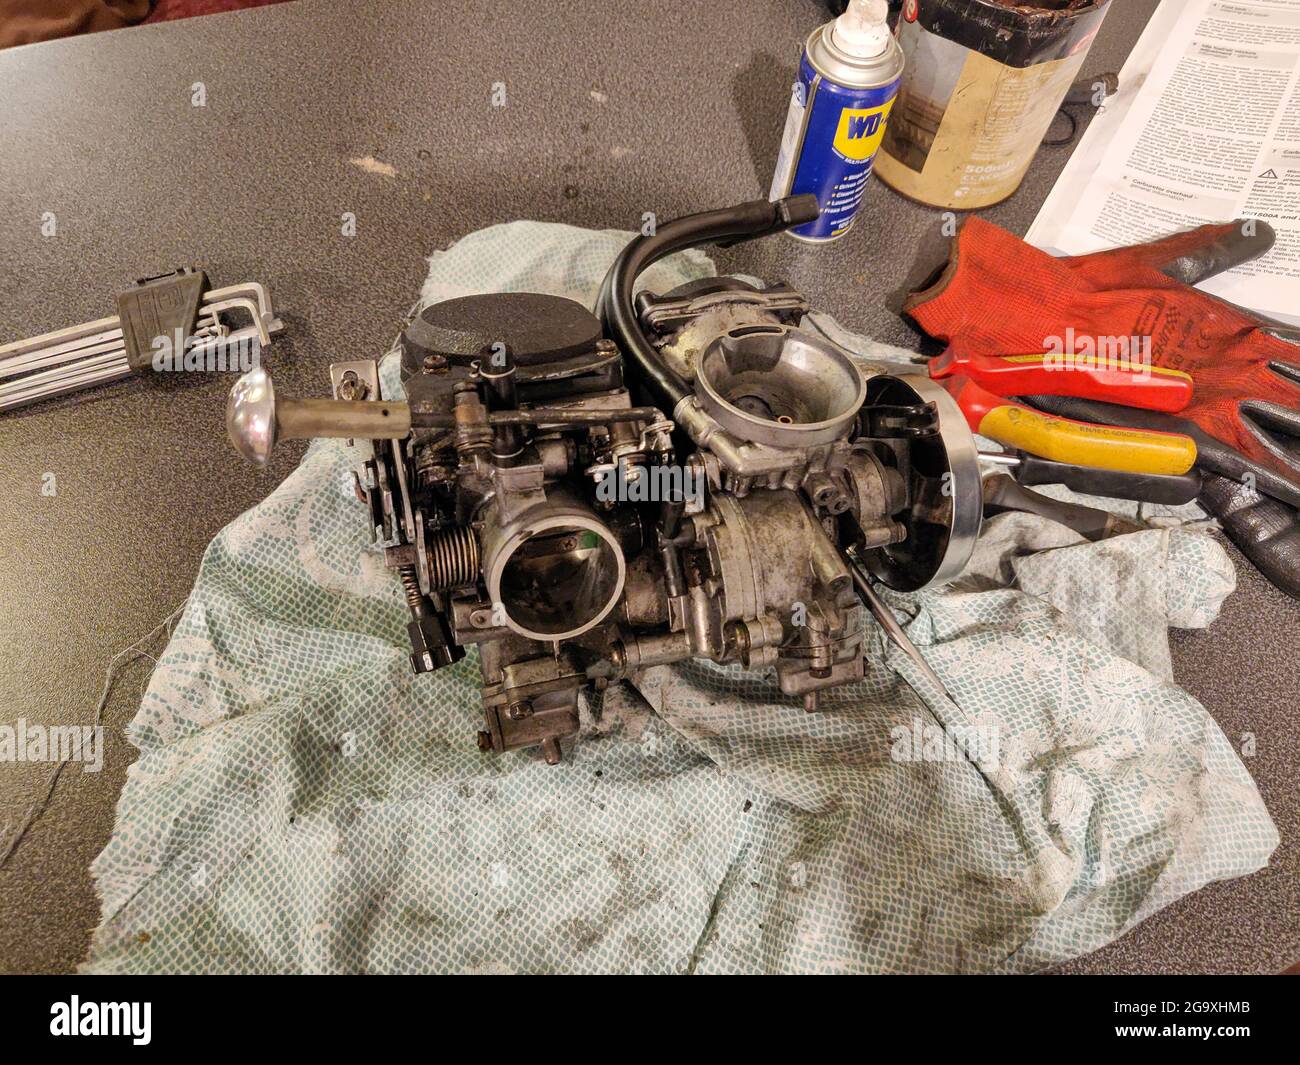 BOURNEMOUTH, UNITED KINGDOM - Jul 08, 2021: A V-Twin Carburettor on a bBench with WD-40 and tools in a repair shop in Bournemouth, United Kingdom Stock Photo